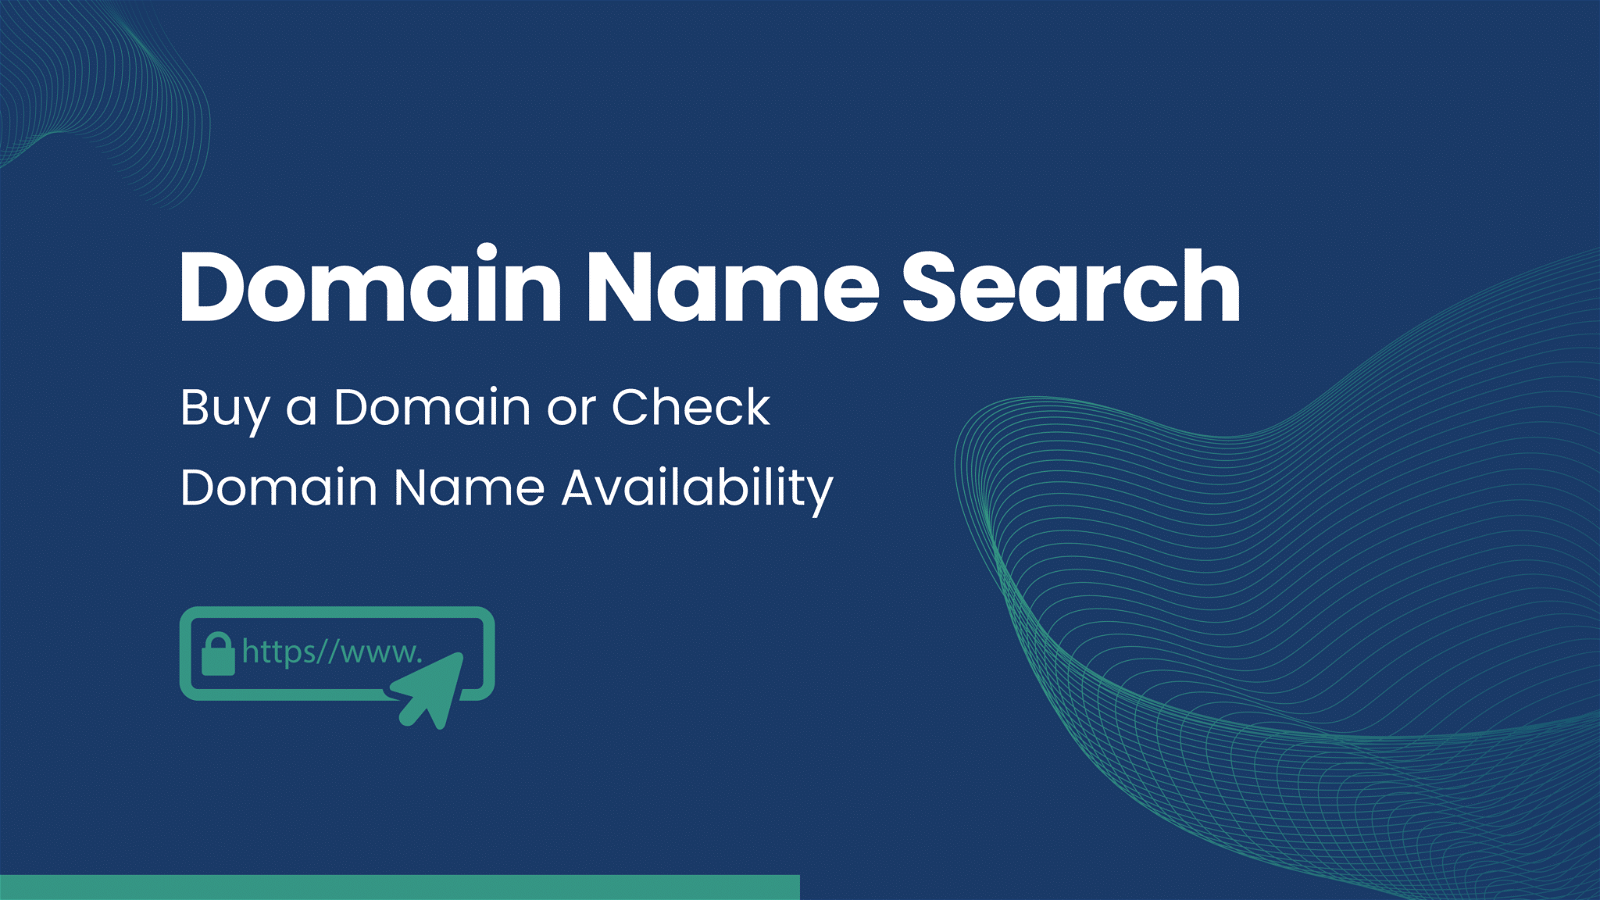 In this image, a website is offering a domain name search to buy a domain or check its availability.